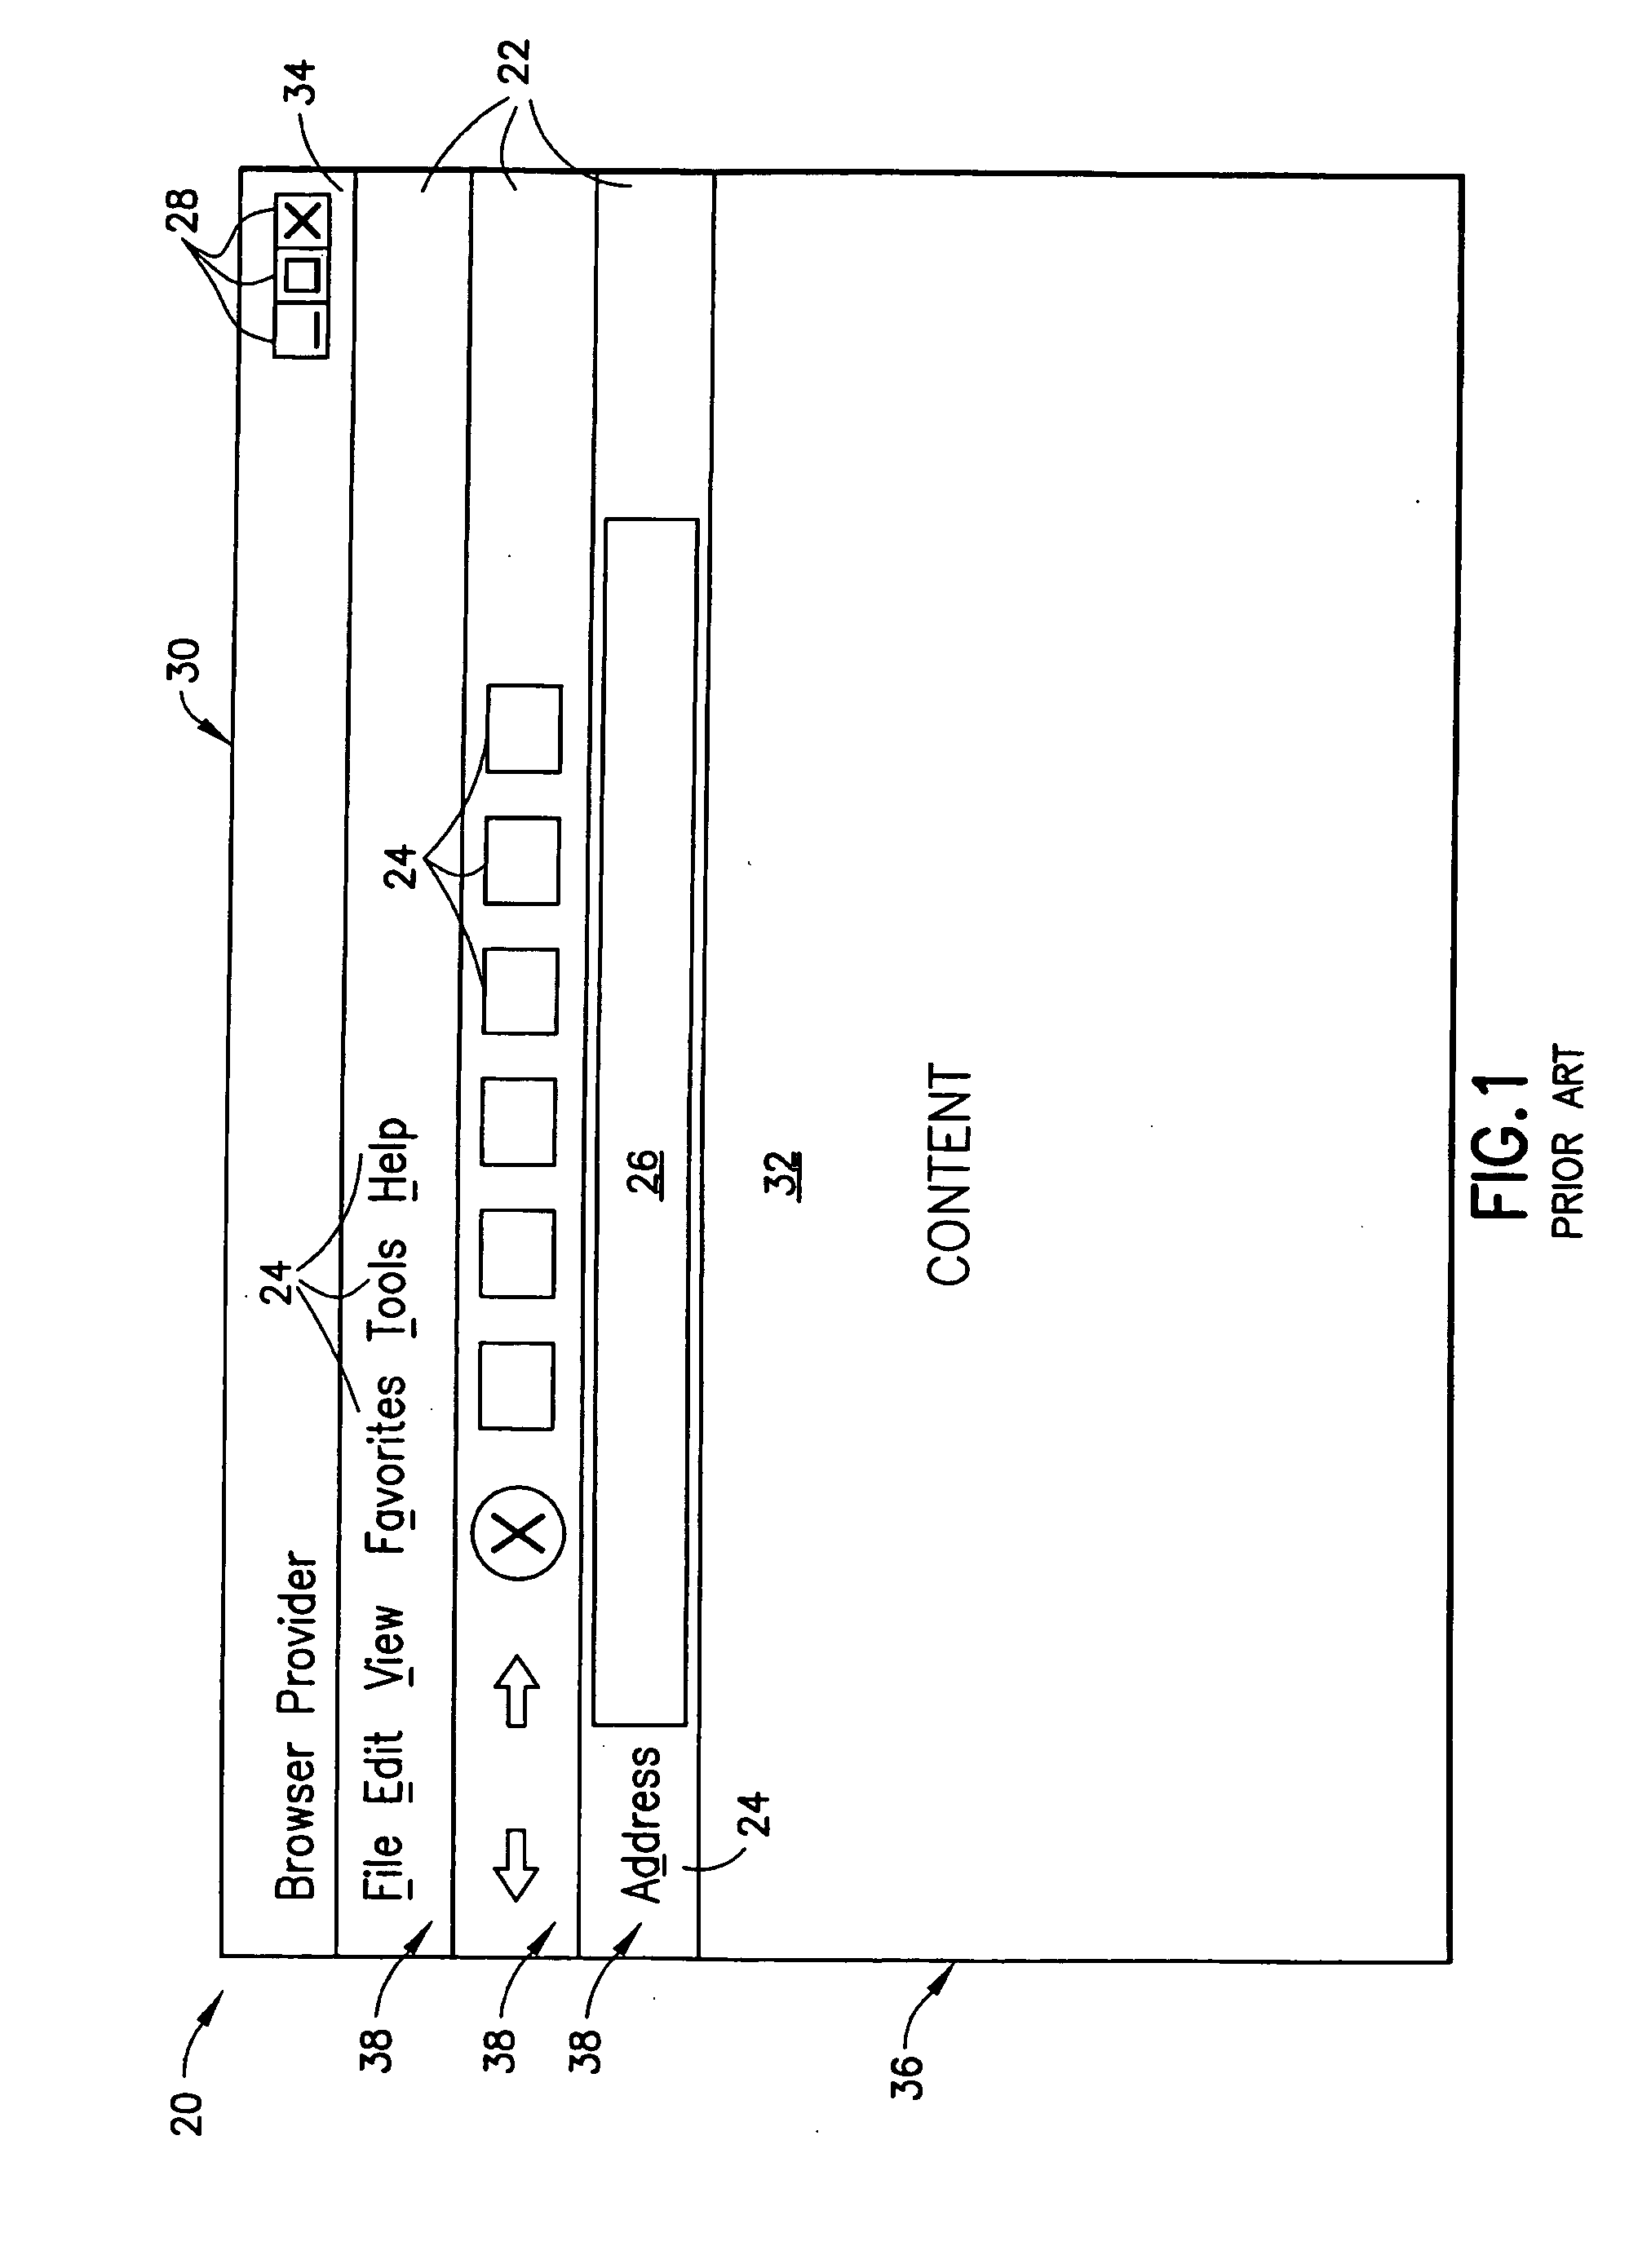 Method and system of facilitating on-line shopping using a dynamically controlled browser interface